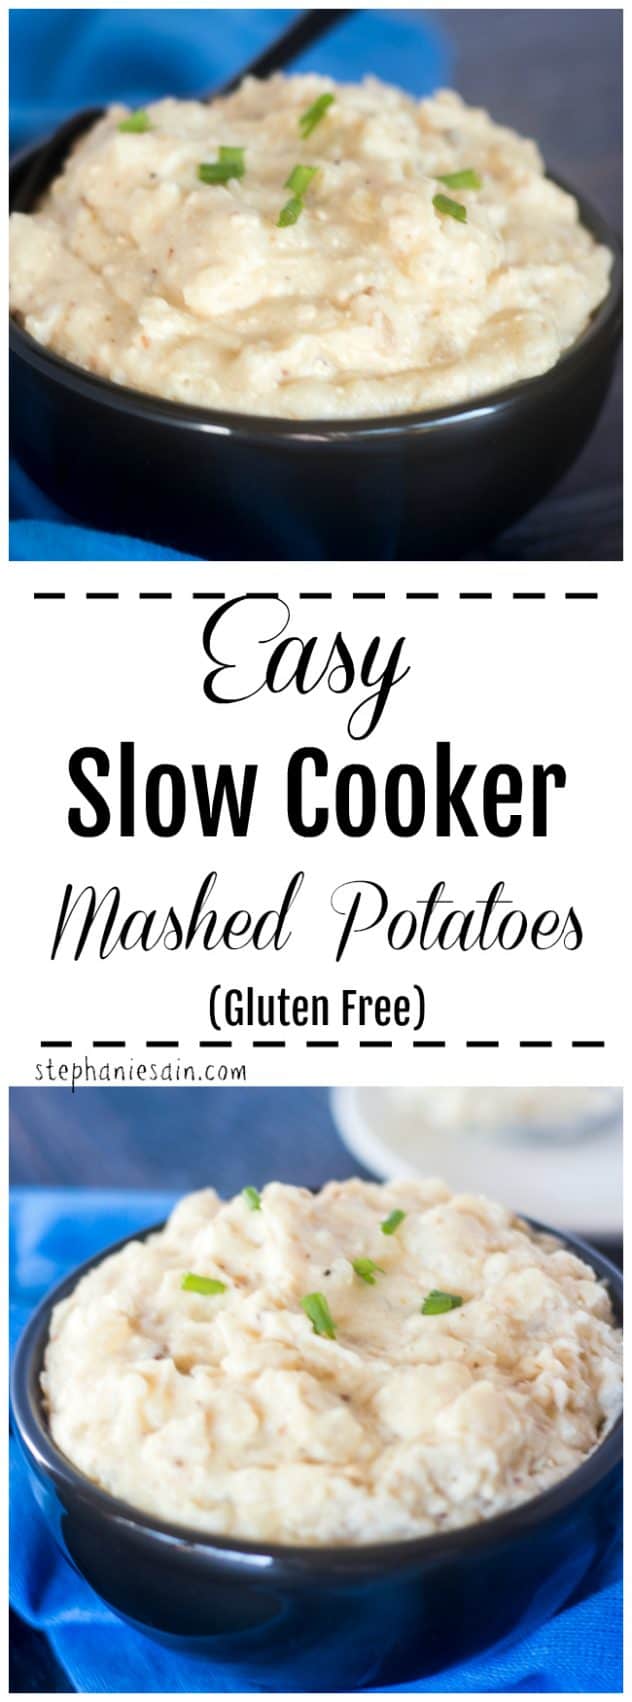 This Slow Cooker Mashed Potatoes are super easy to make, creamy and delicious. The perfect side with any meal and a great way to get an early start on dinner. Also great for the holidays when you don't have that extra burner. Gluten Free.